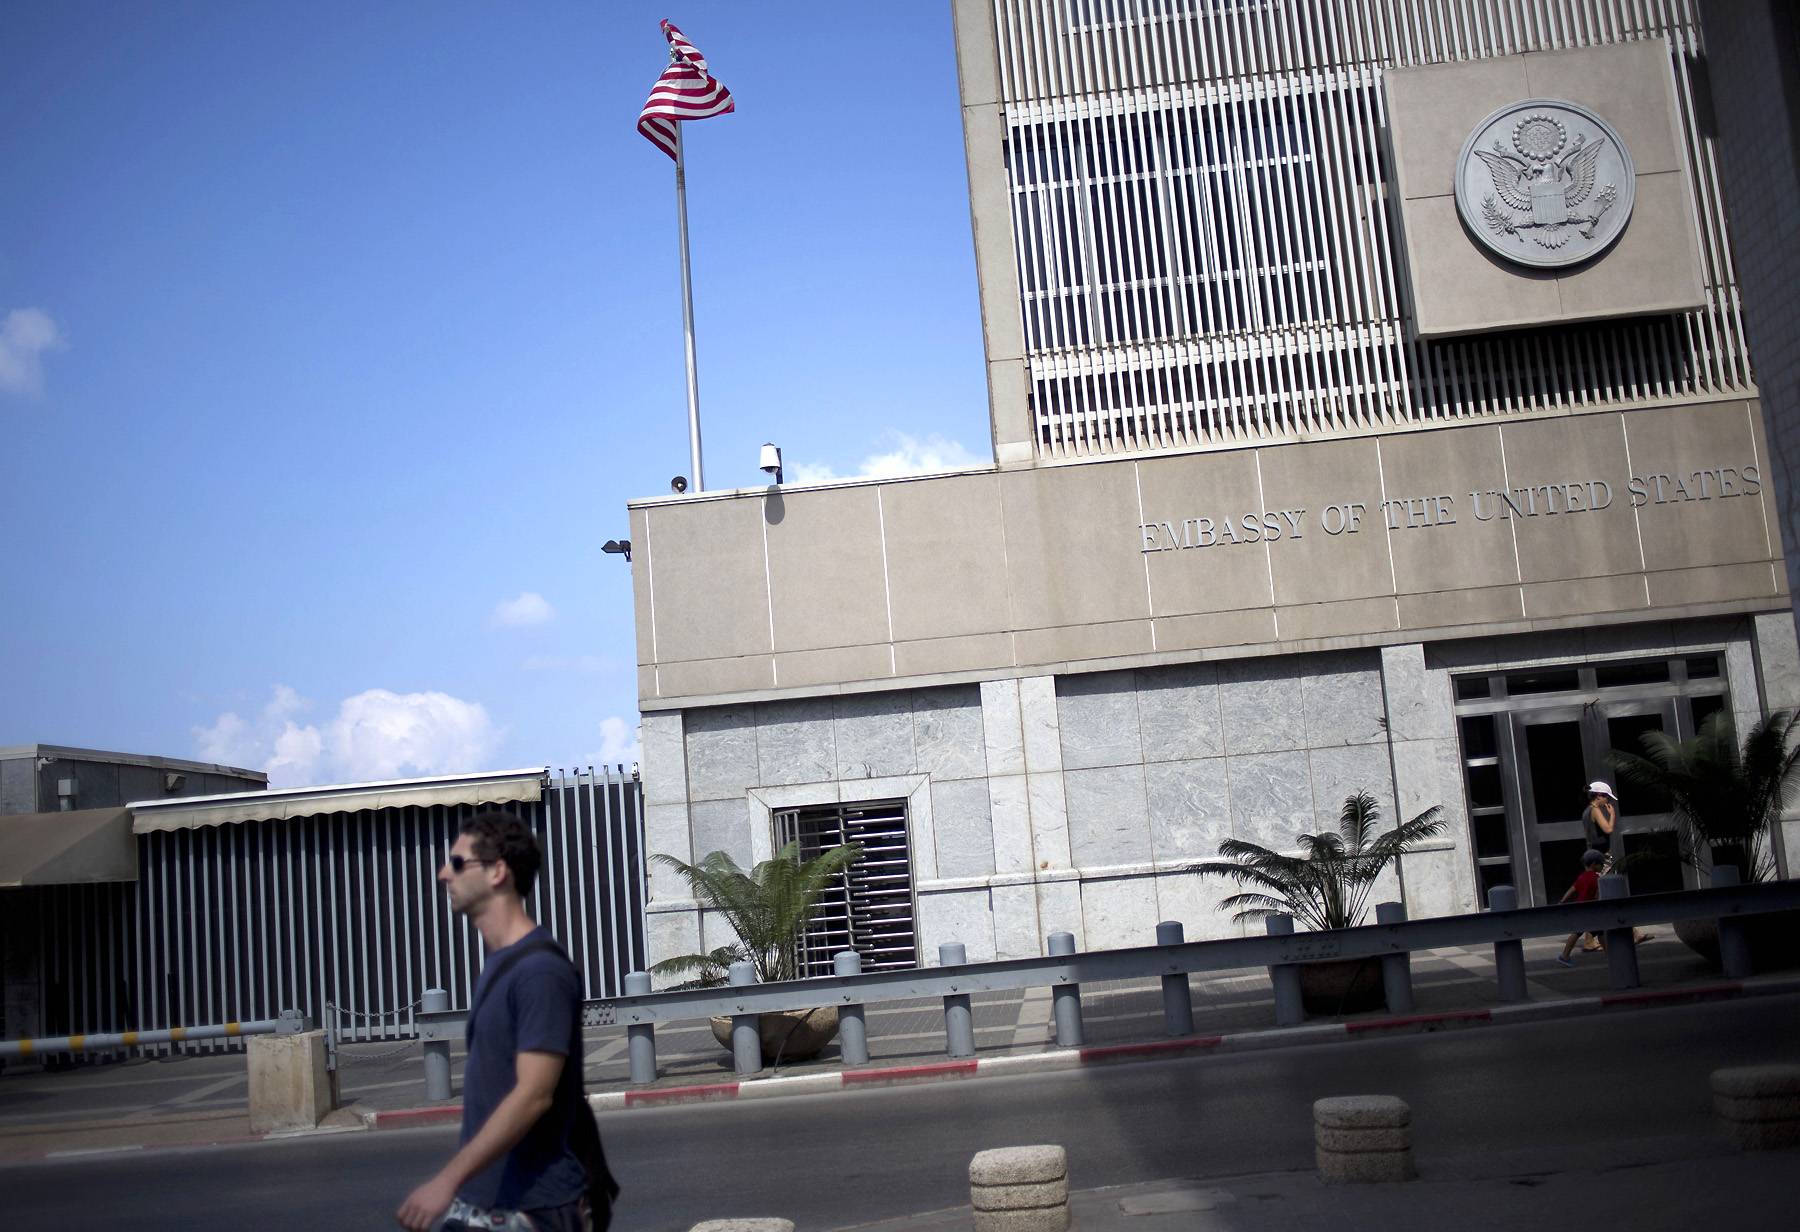 Everything You Need to Know About the U.S. Embassy Closures